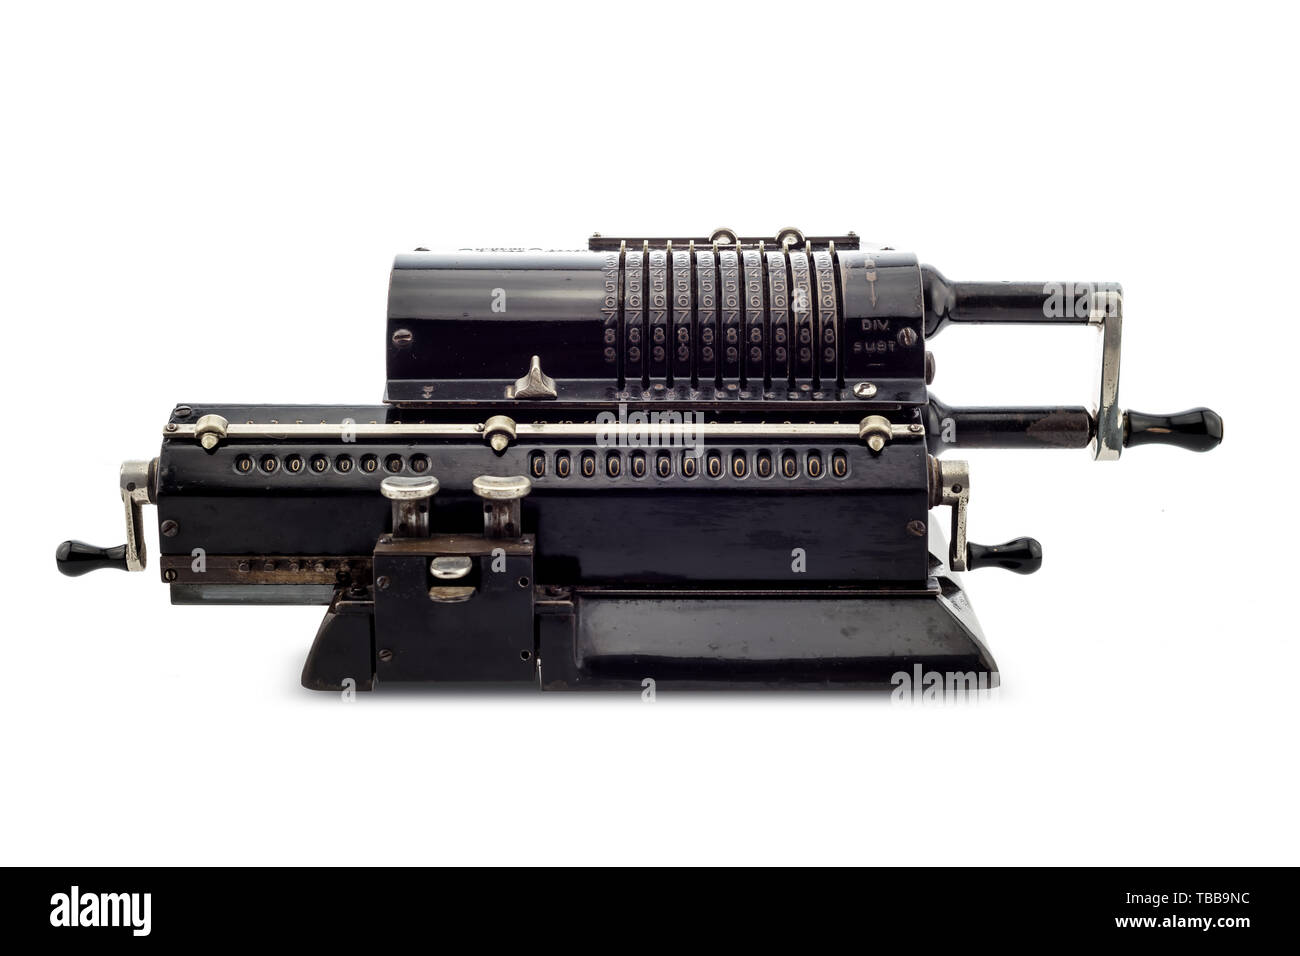 Ancient pinwheel mechanical calculator.The calculating machine, is a mechanical device used to perform automatically the basic operations of arithmeti Stock Photo